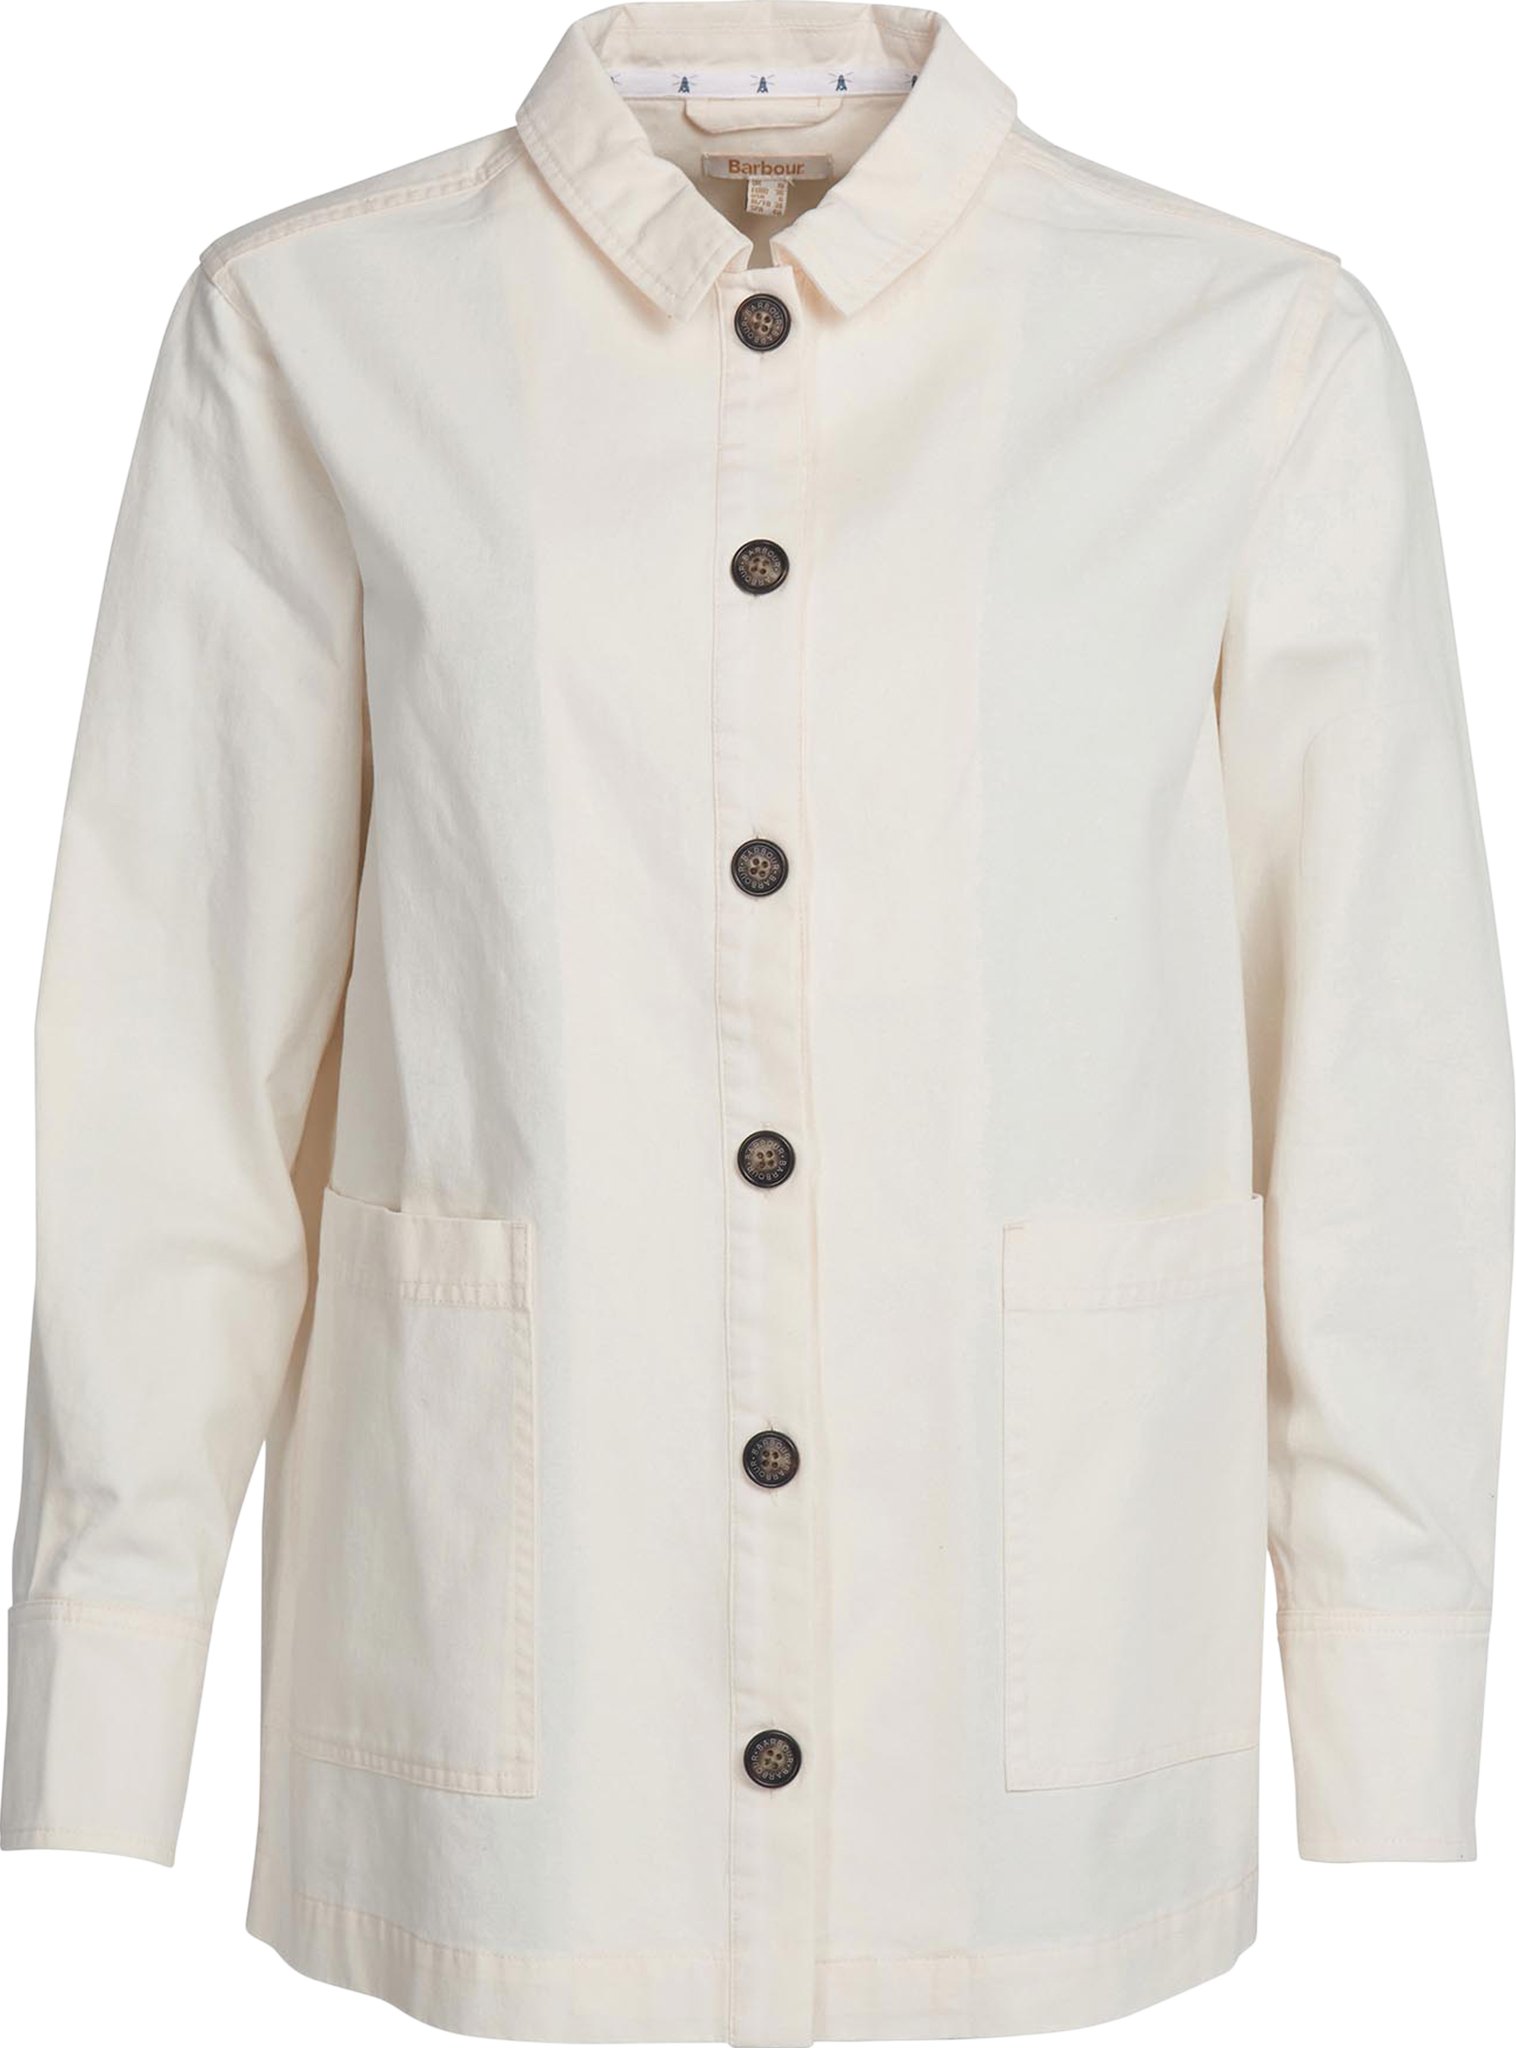 Product image for Lyndale Overshirt - Women's